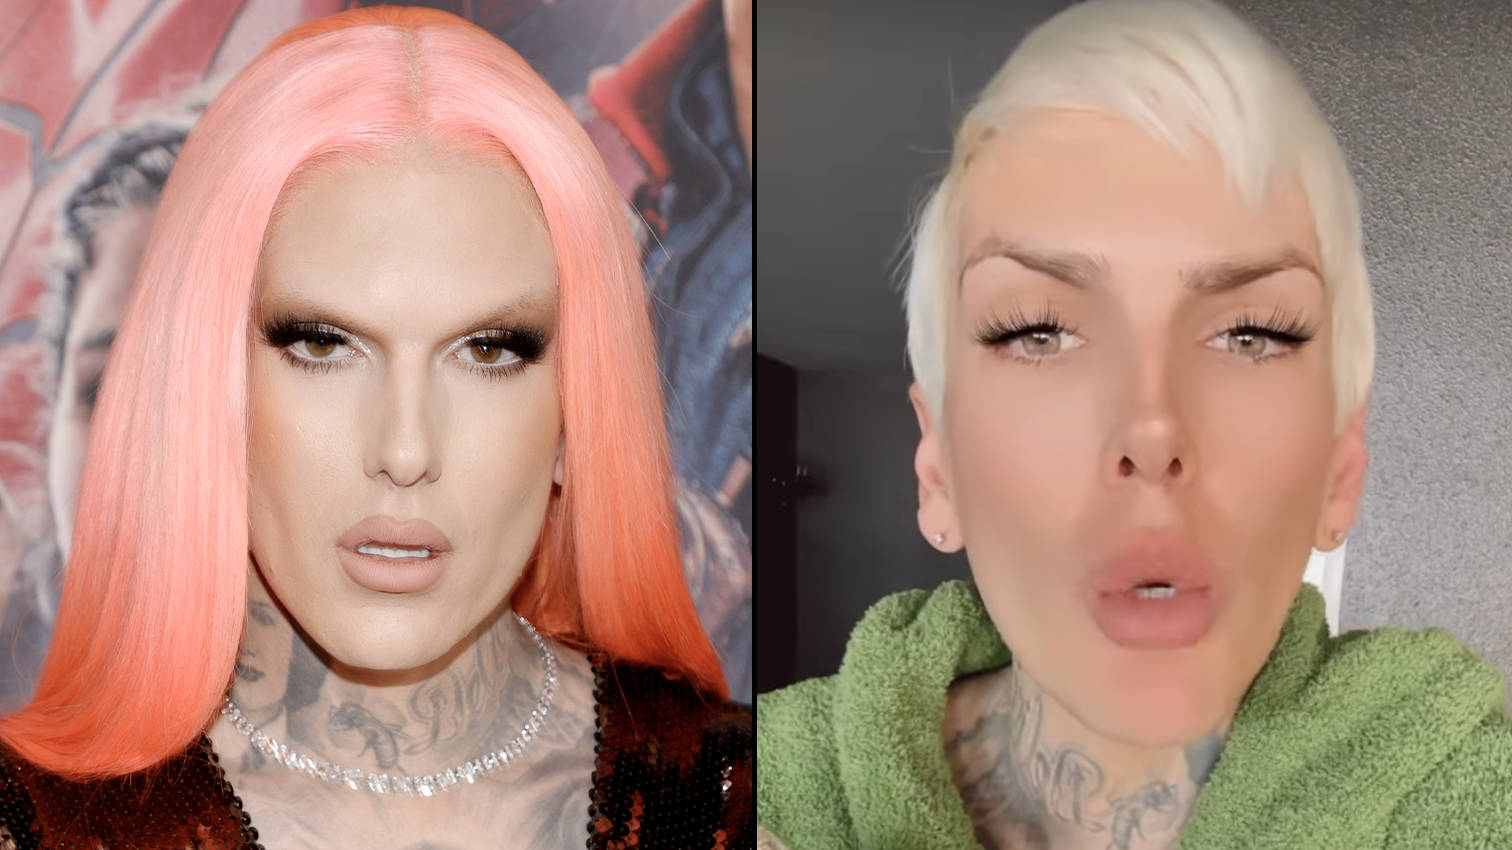 Jeffree Star responds to backlash over disgusting comments about  non-binary pronouns - PopBuzz